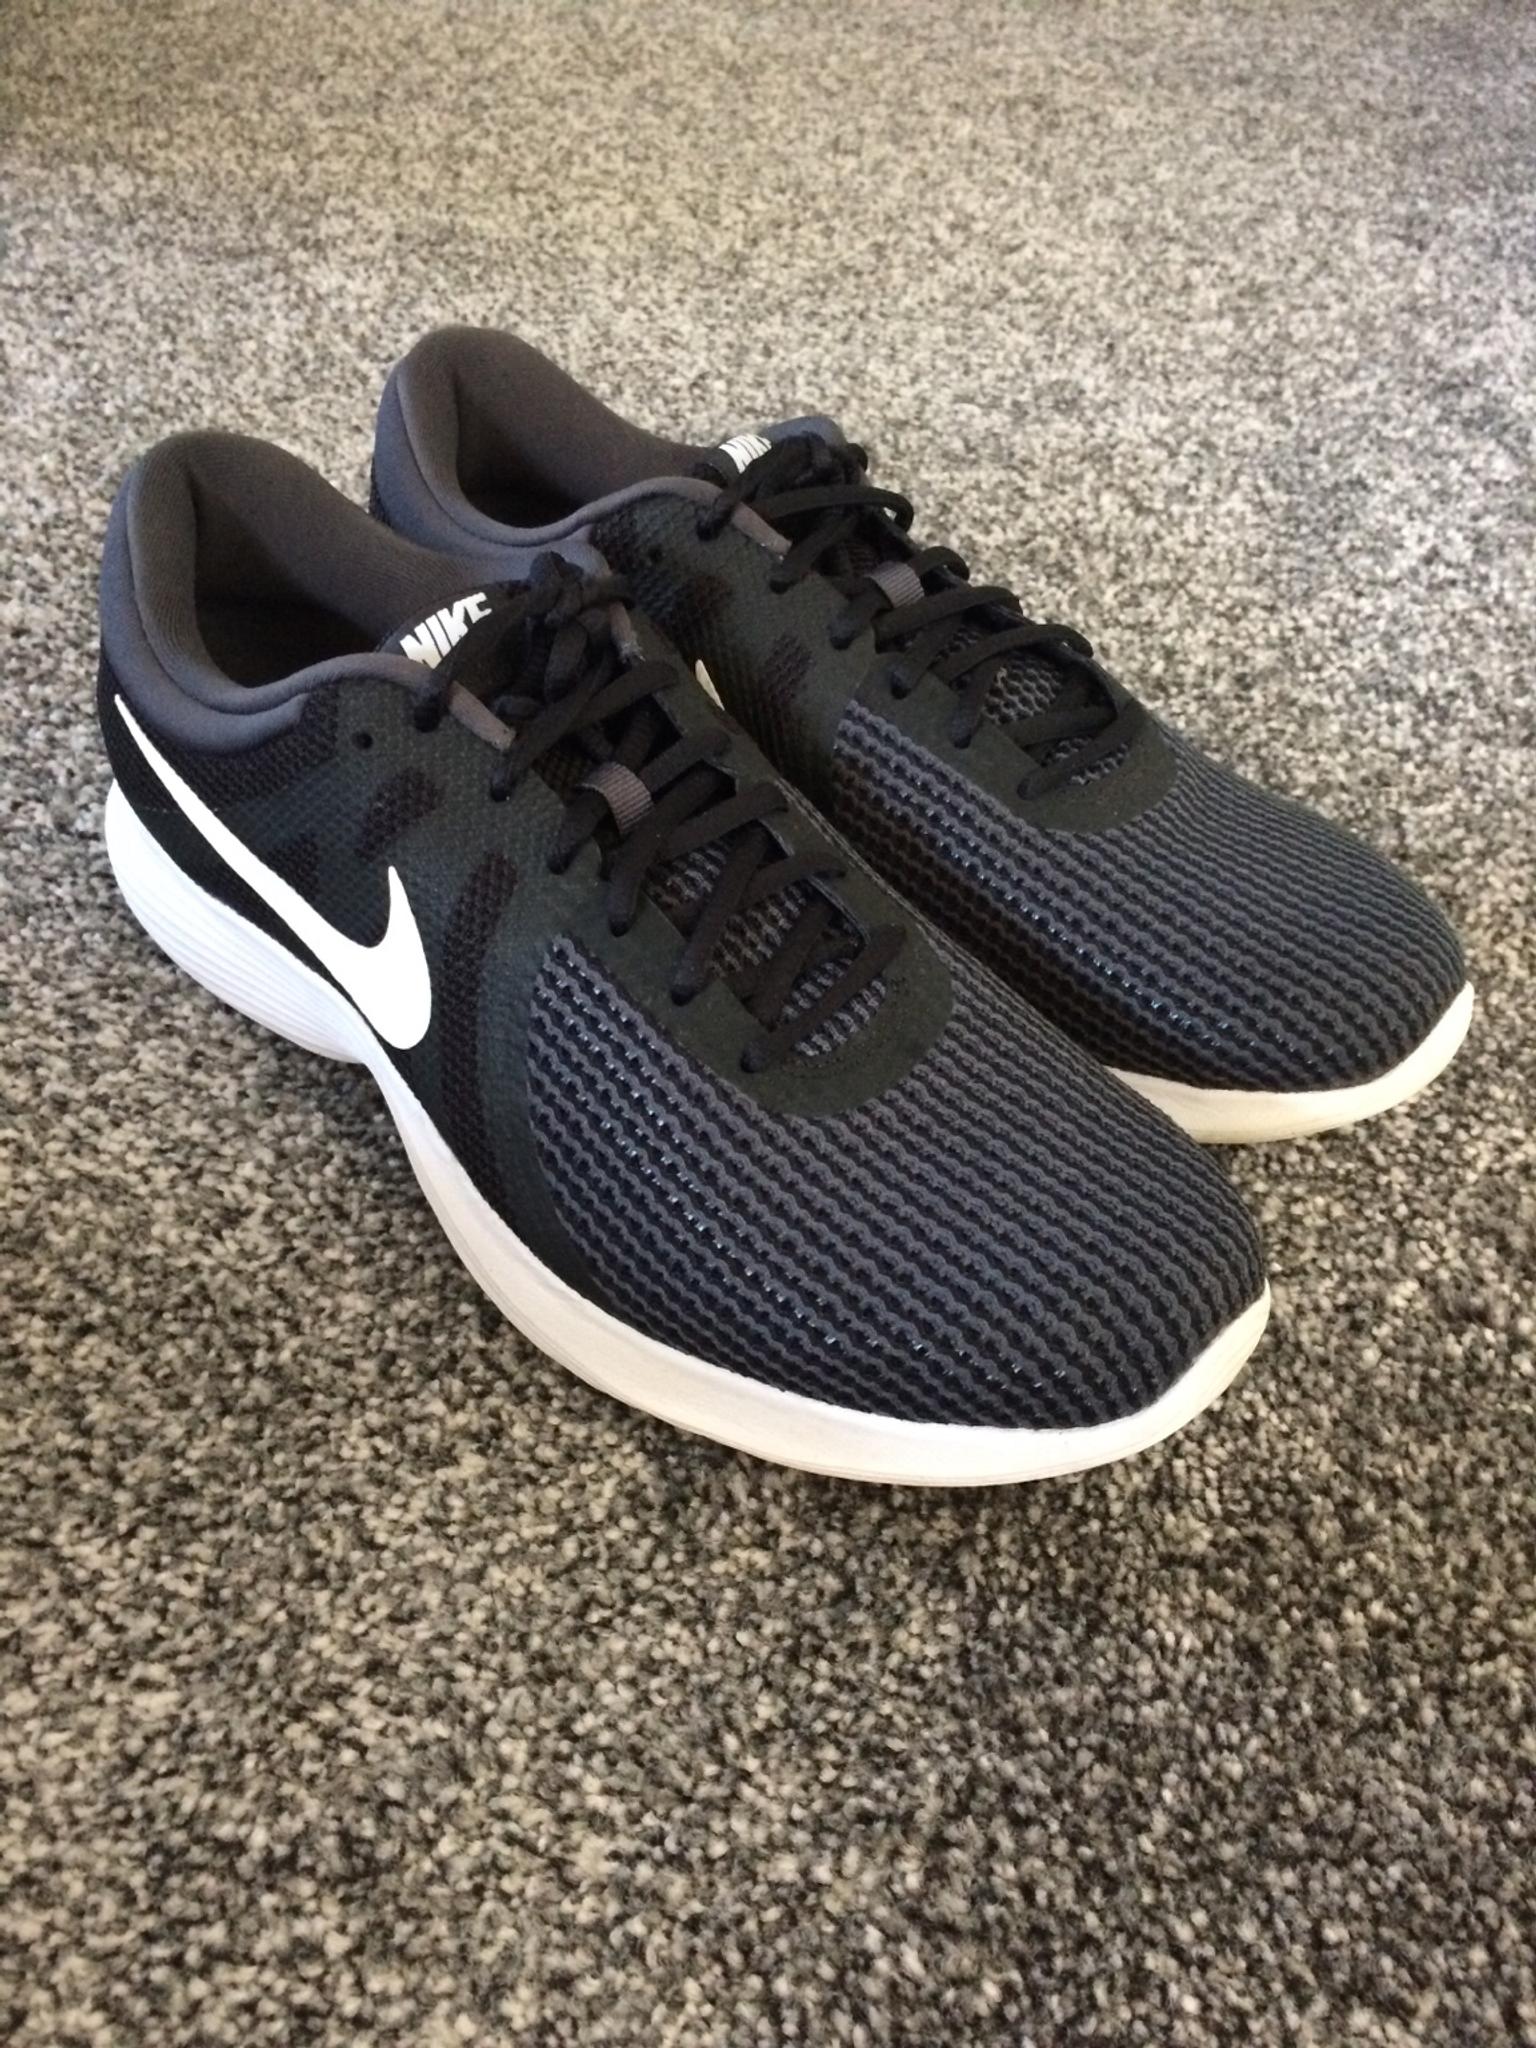 mens black nike trainers size 